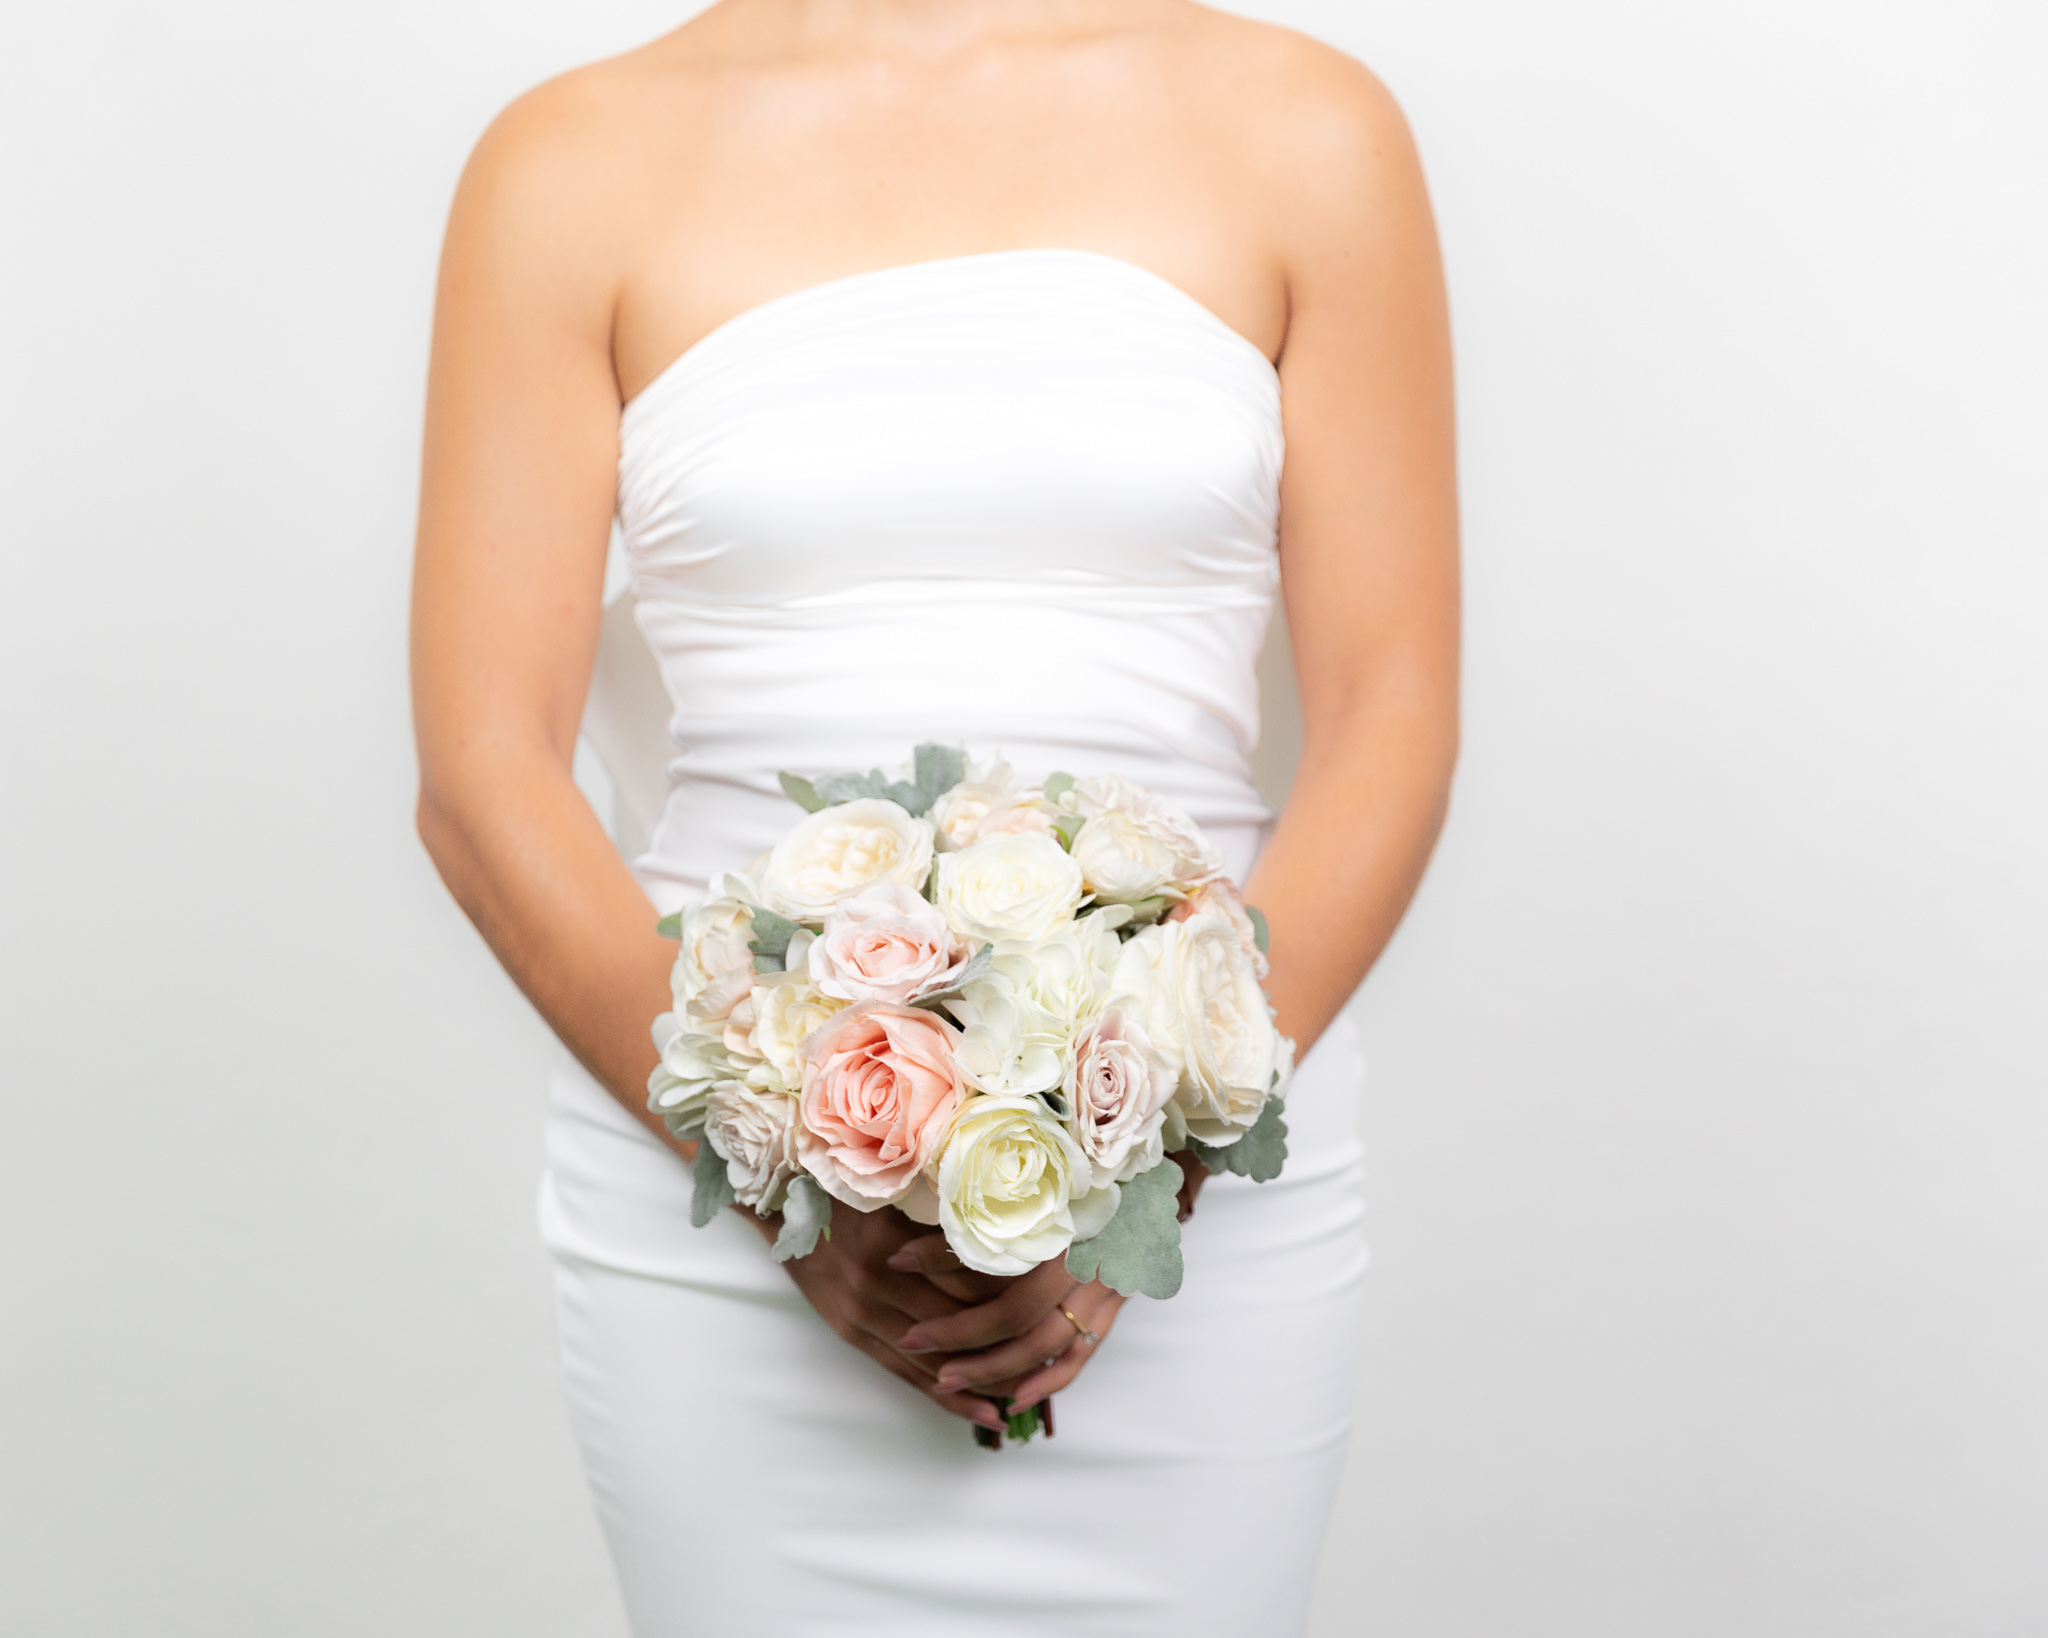 Classic wedding bouquet blush and white artificial flowers